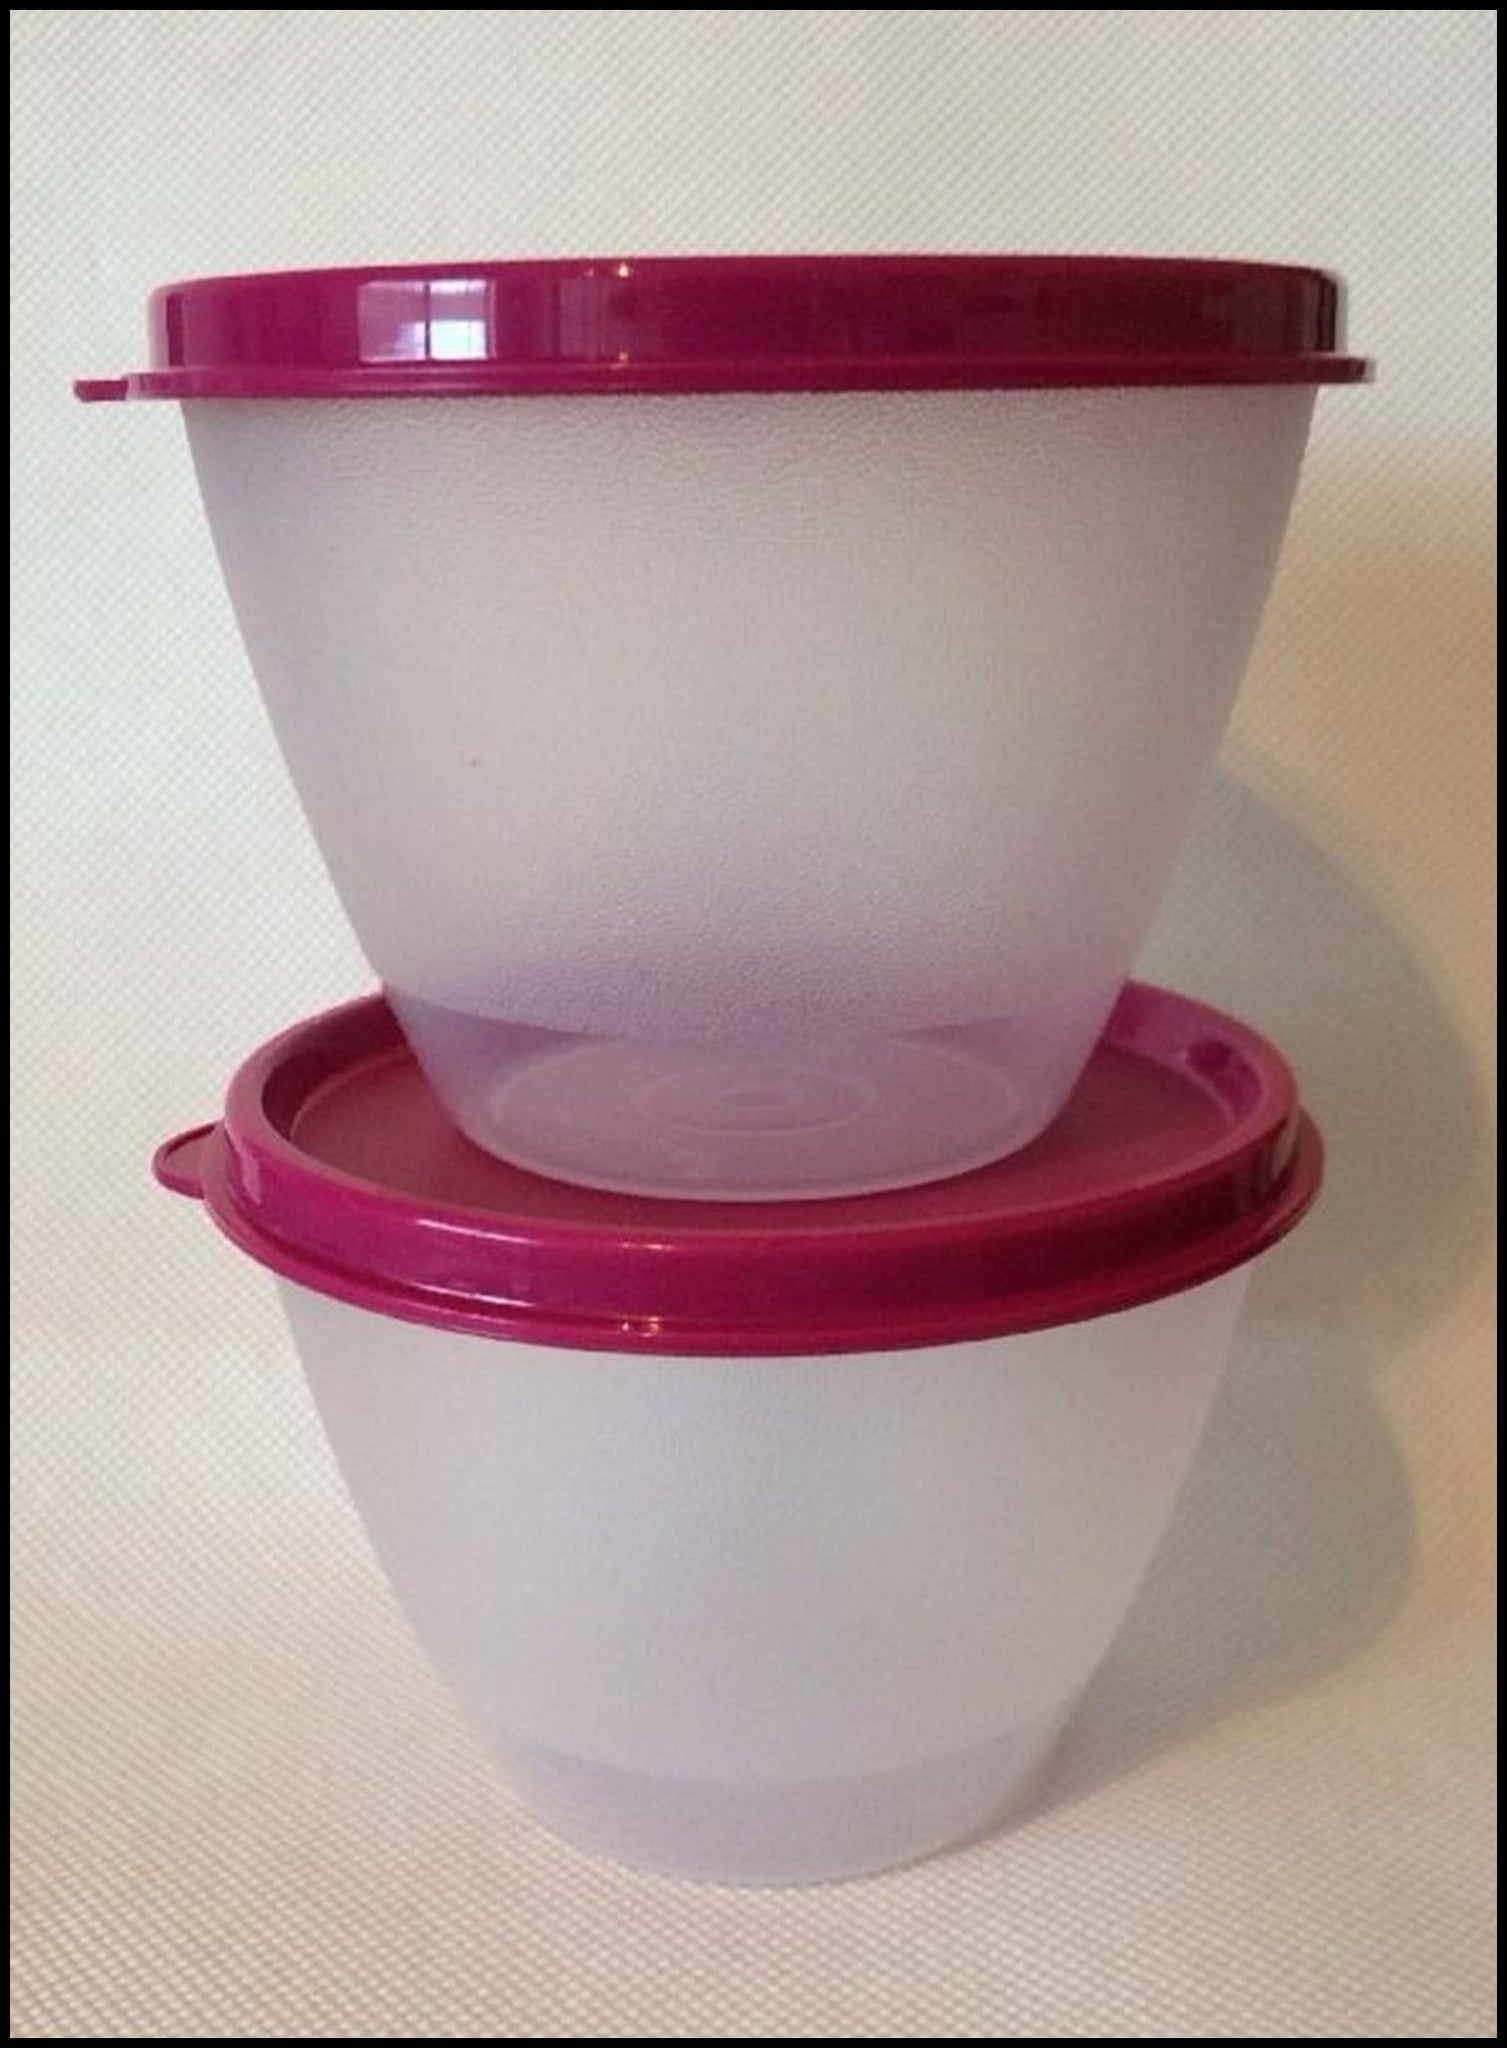 Tupperware Mini Snack Cups 2 oz. Containers Set of 2 Sea Green